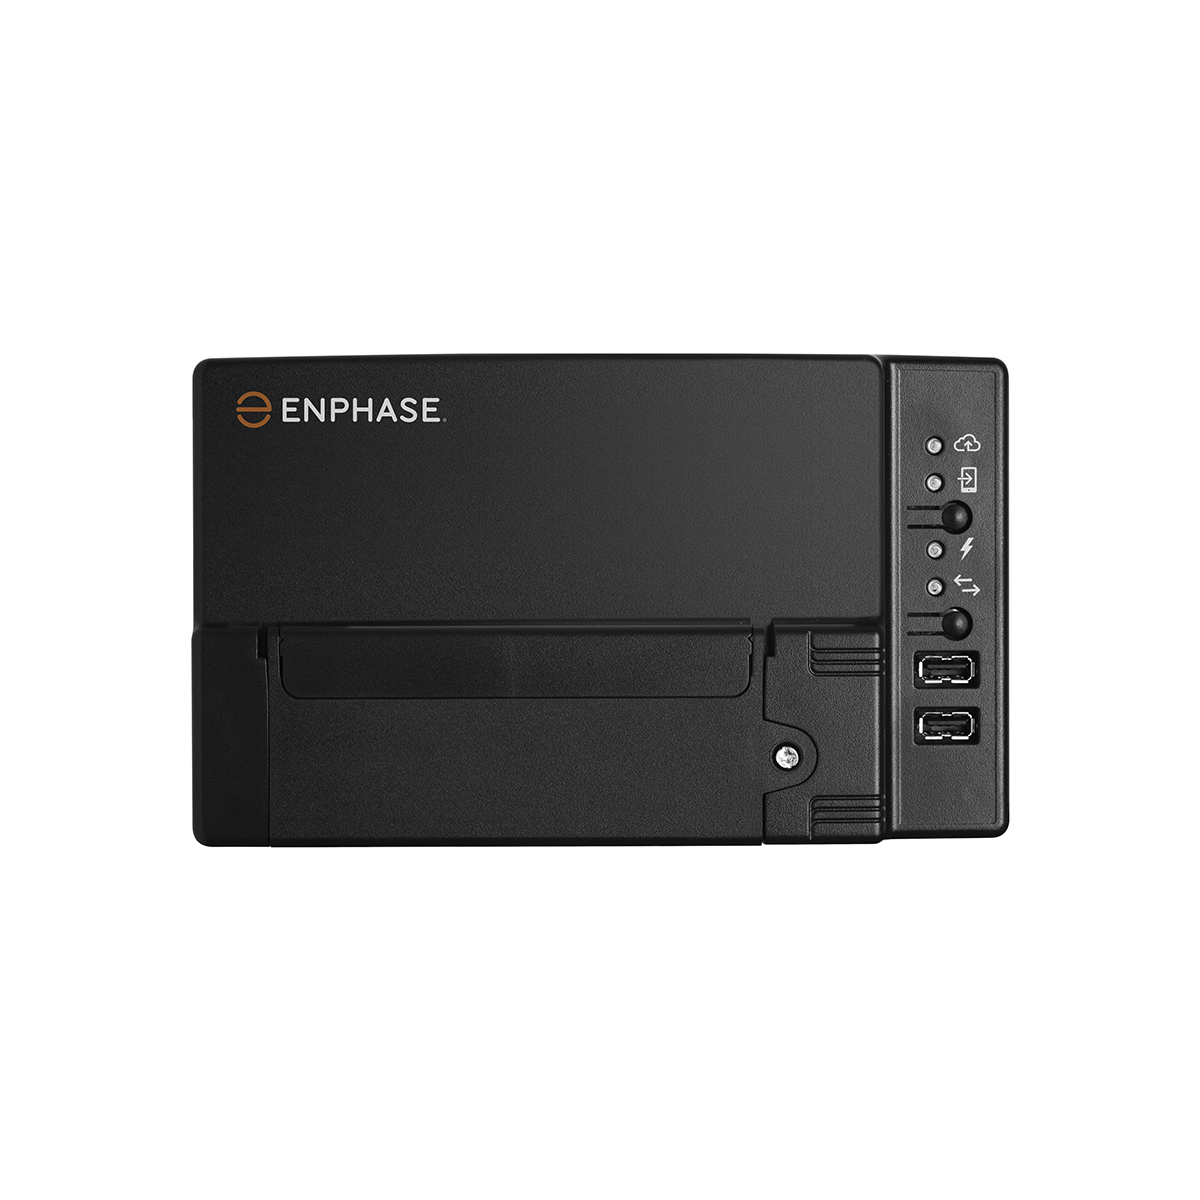 22x Sunpower P6 8910 wp met Enphase IQ8A en Accu 1x N Charge 10T,1 x N Charge 3T